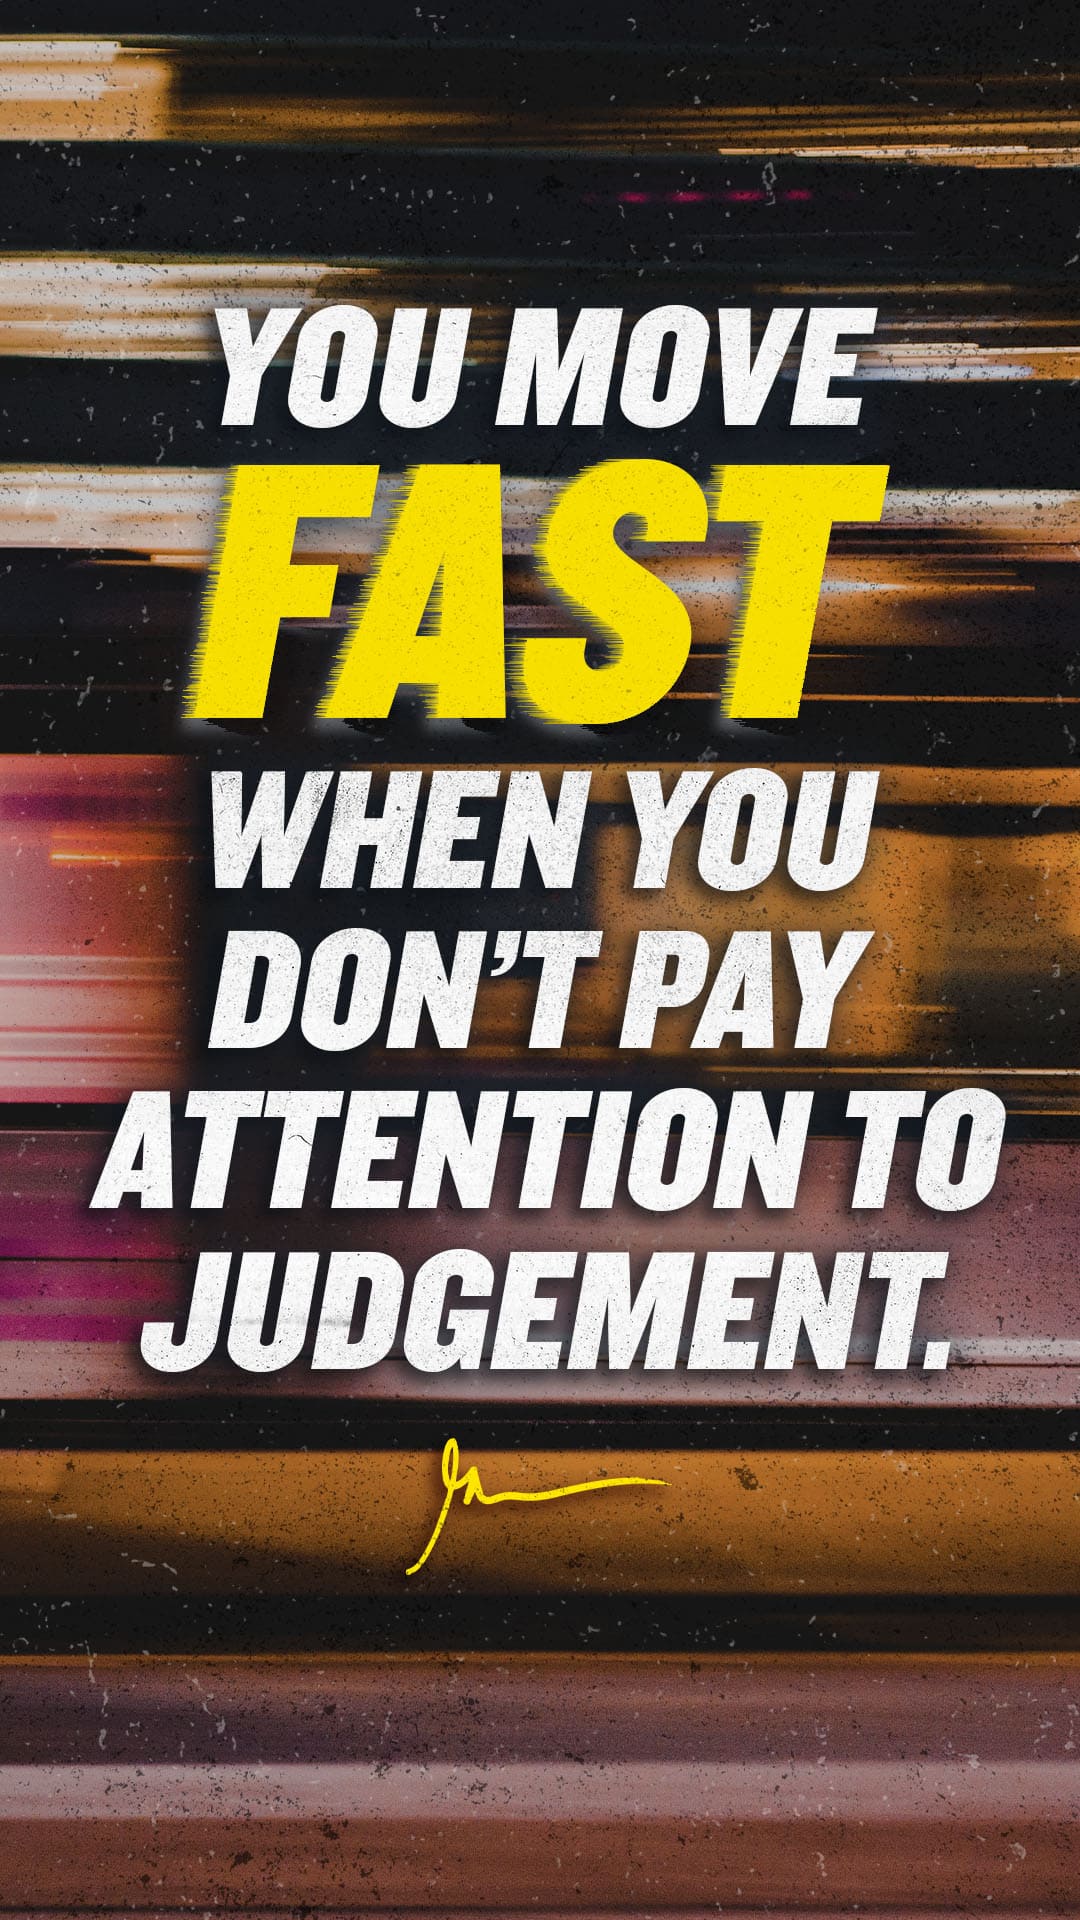 You move fast when you don't pay attention to judgement.